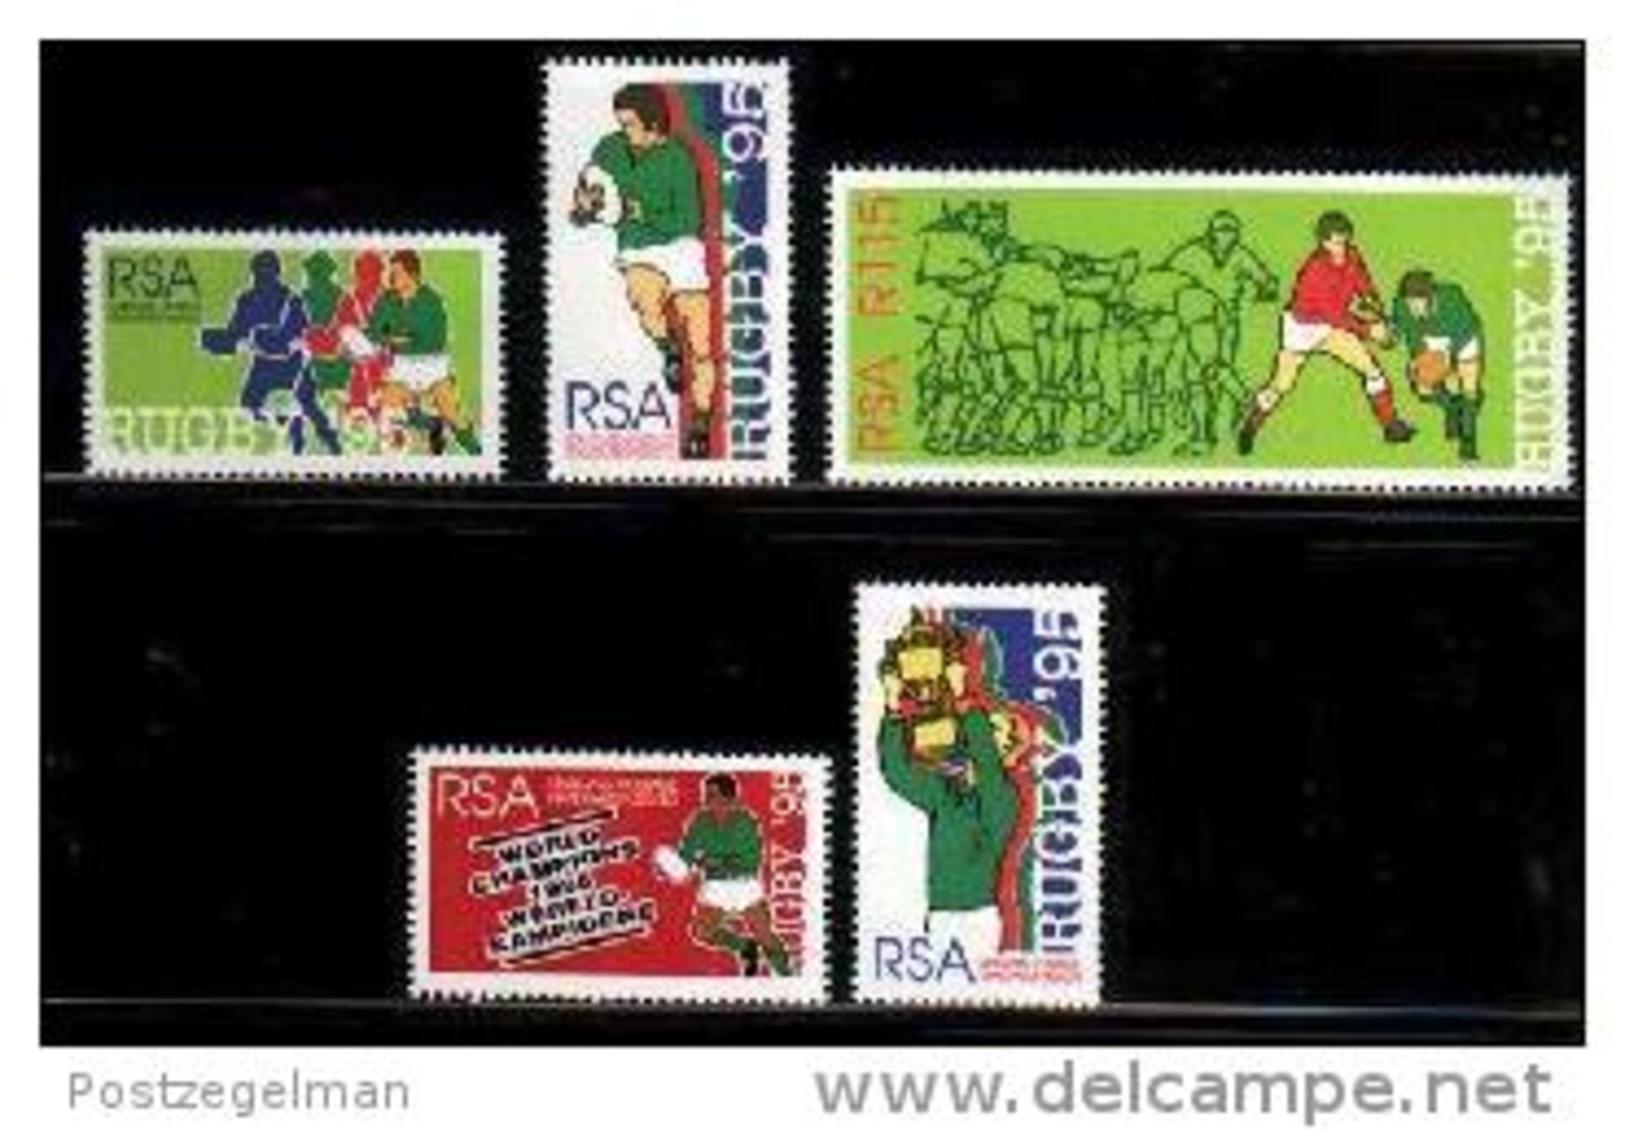 REPUBLIC OF SOUTH AFRICA, 1995, MNH Stamp(s) Rugby/champions,   Nr(s.) 956-958, 960-961 - Ongebruikt